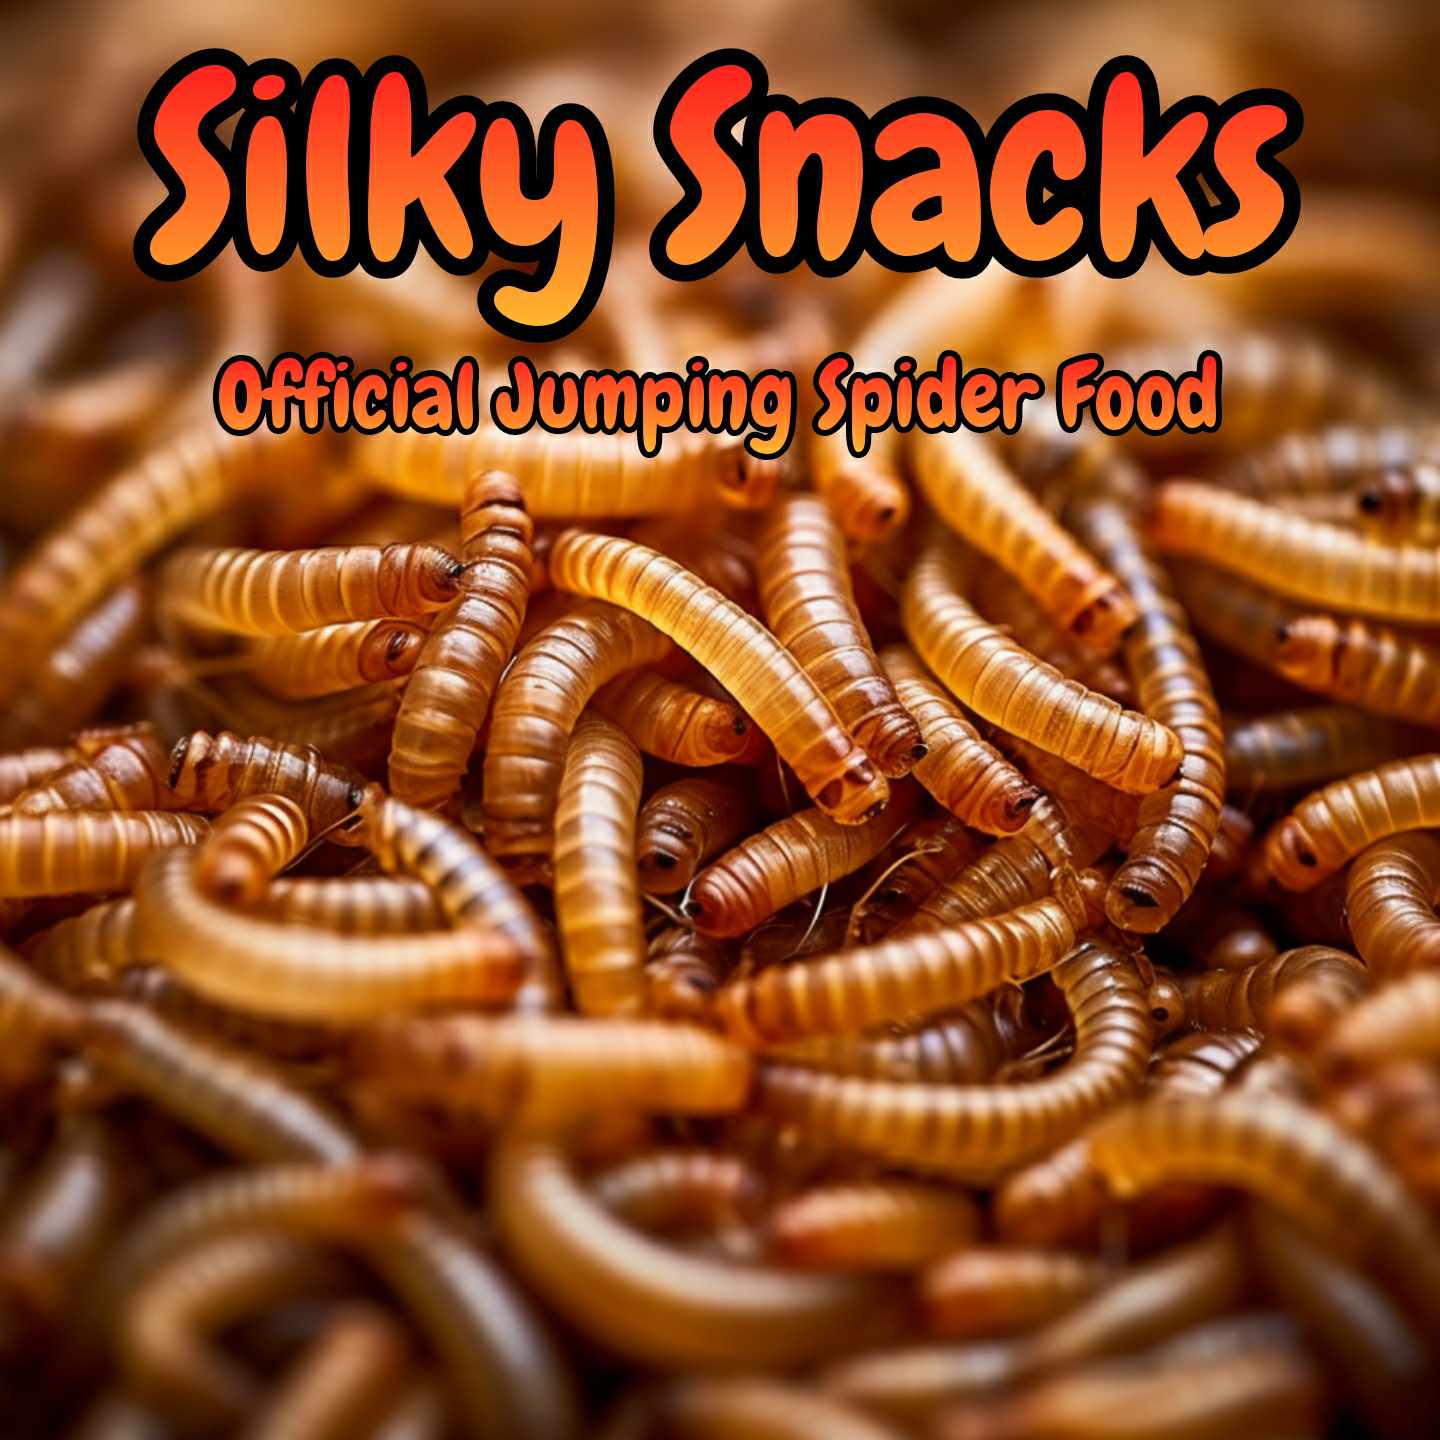 silky snacks, mealworms, mealworms for sale, jumping spider food